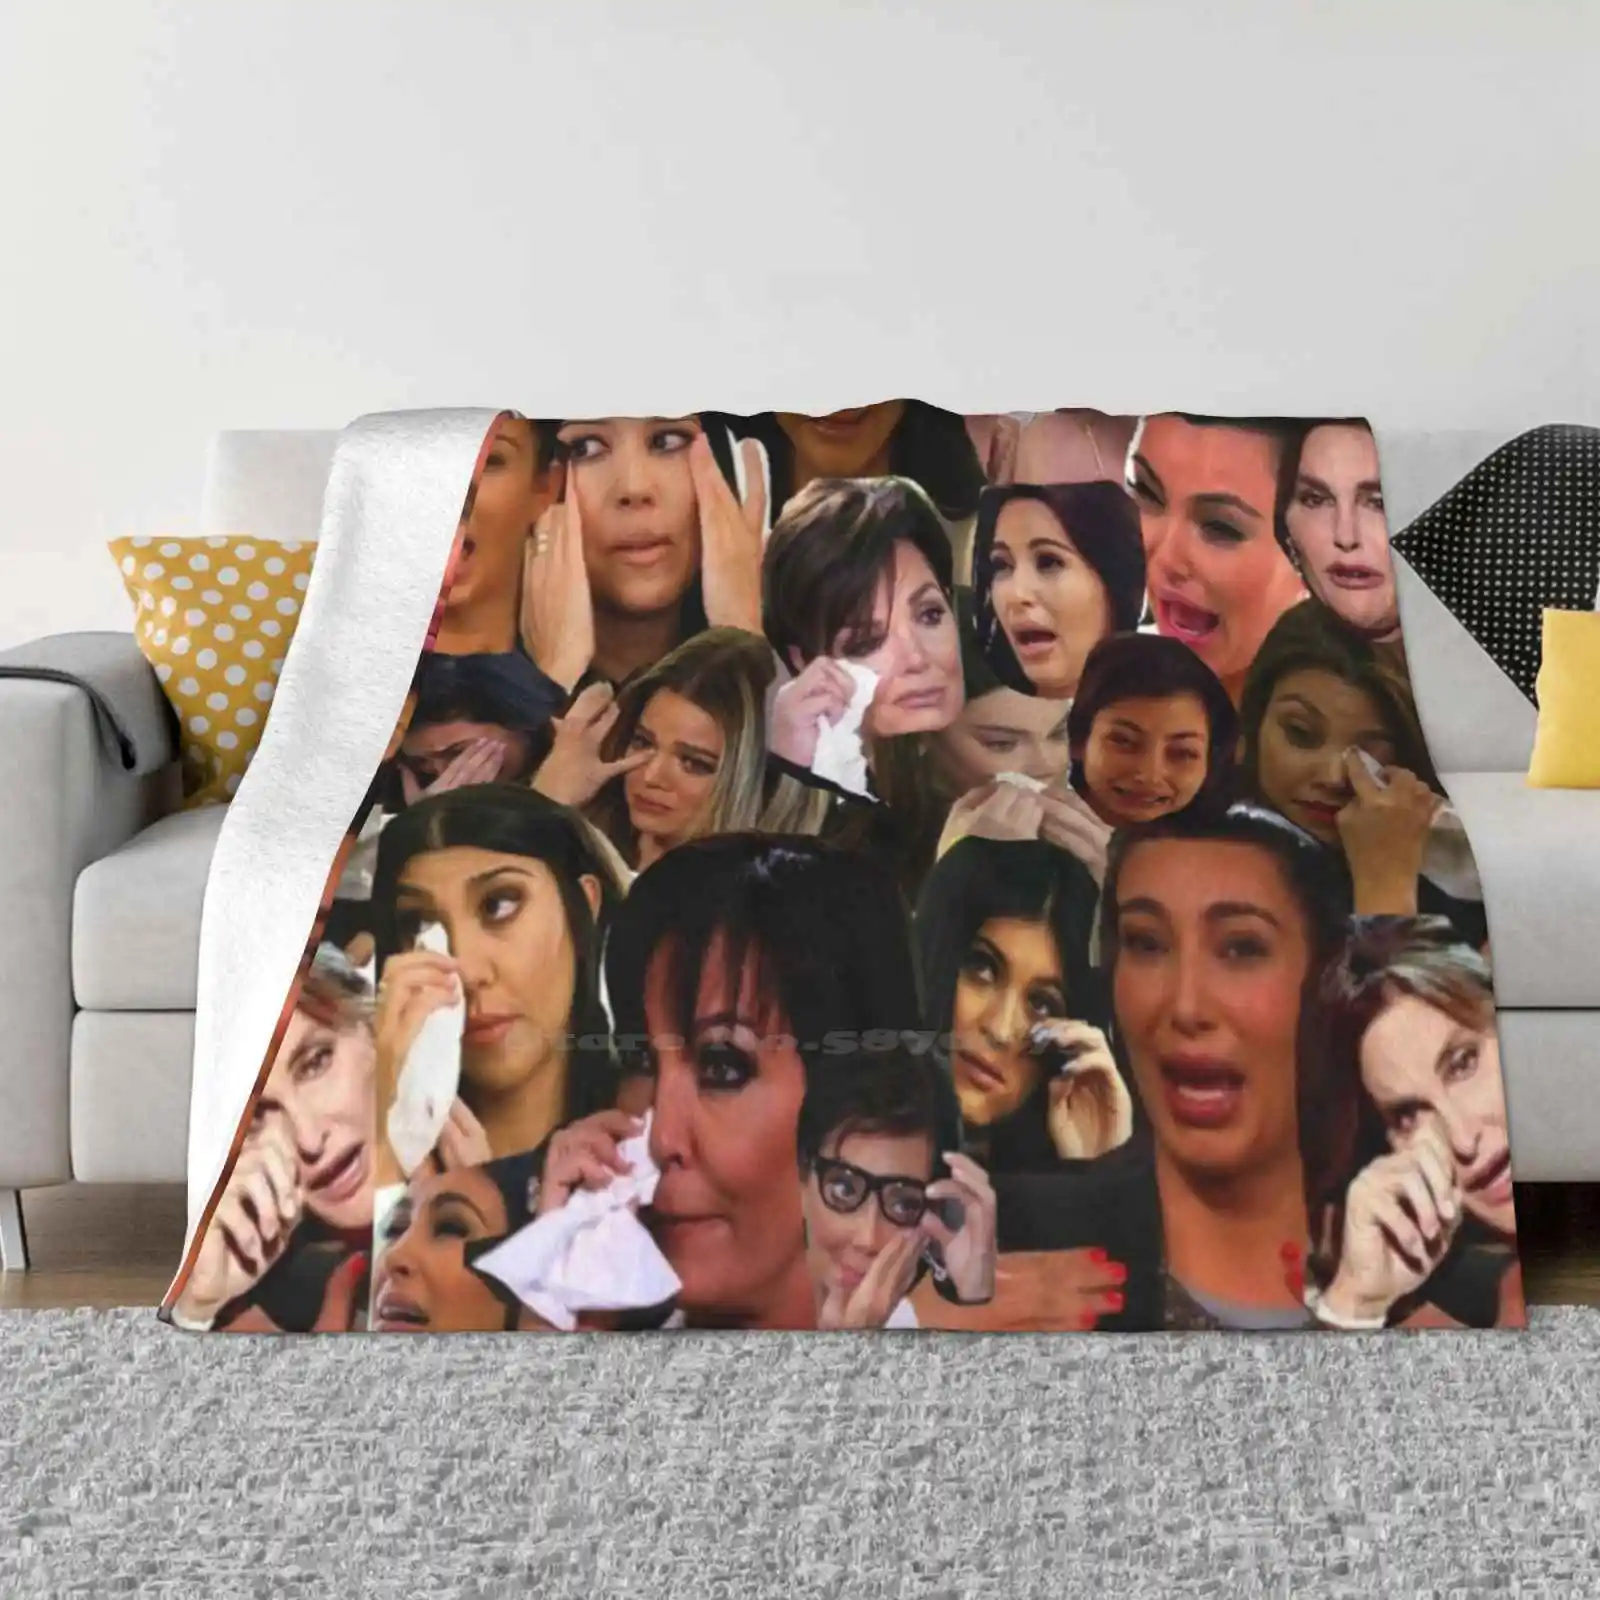 

Kardashian'S Crying Collage Top Quality Comfortable Bed Sofa Soft Blanket Kendall Jenner Kylie Khloe Kourtney Caitlyn